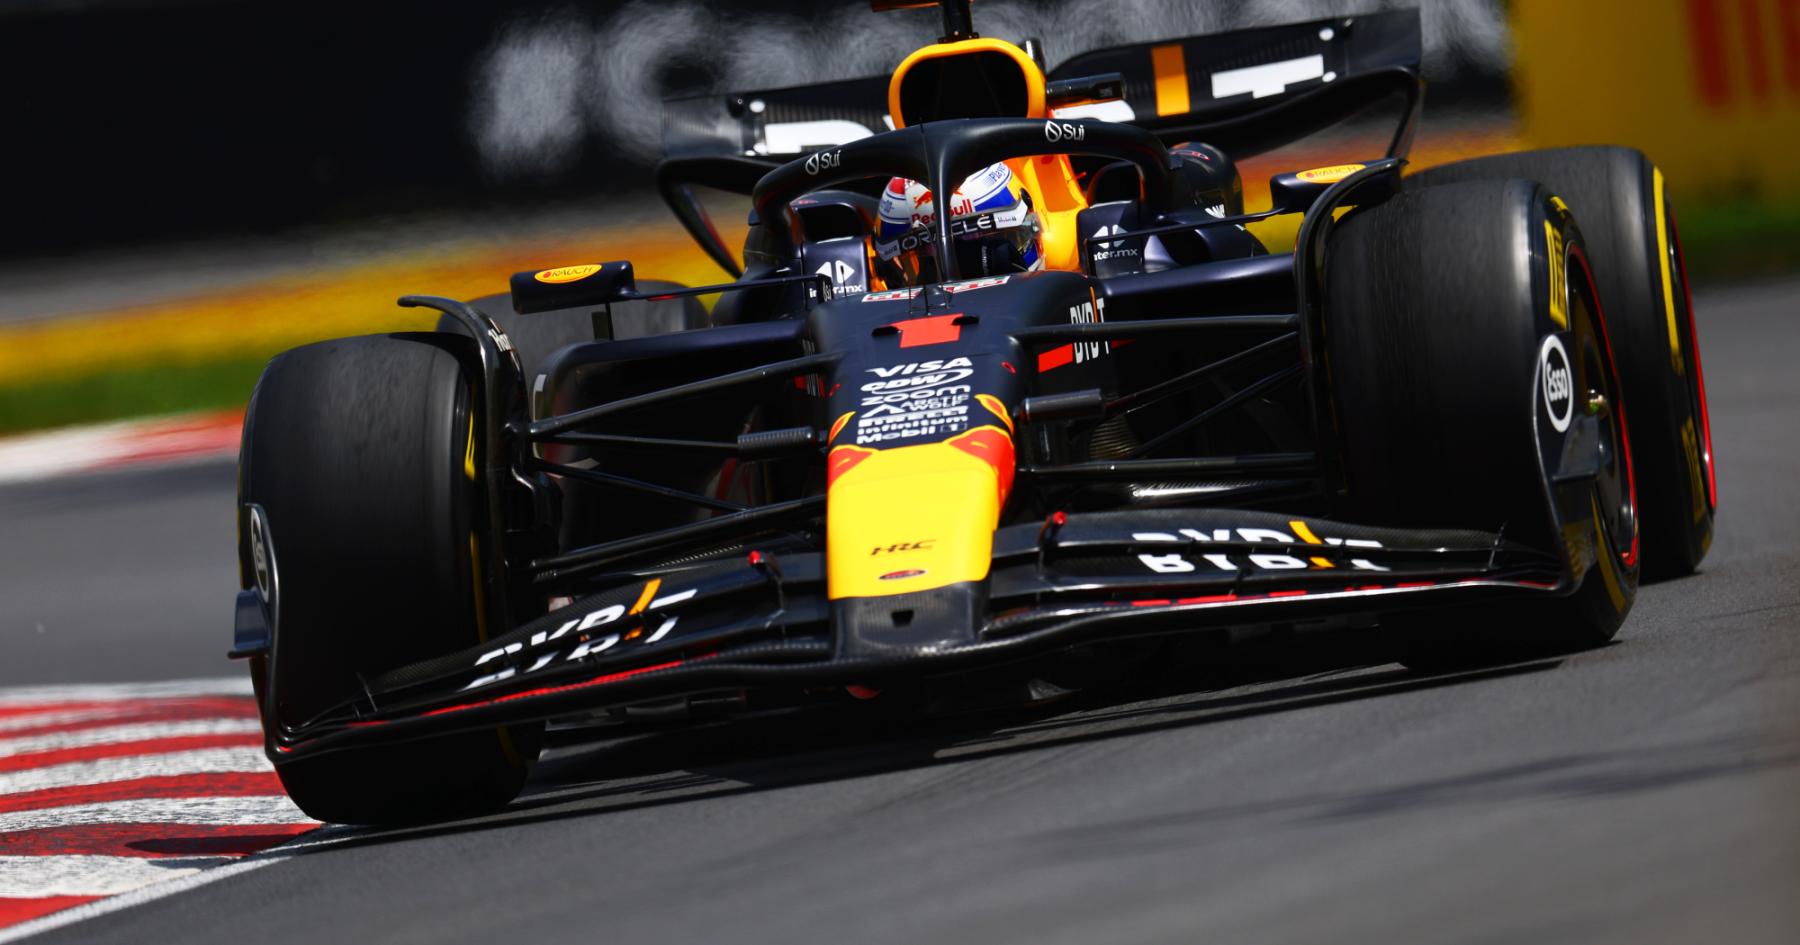 Max Verstappen Soars to New Heights with Game-Changing Red Bull Upgrade – Data Signals Exciting Possibilities!